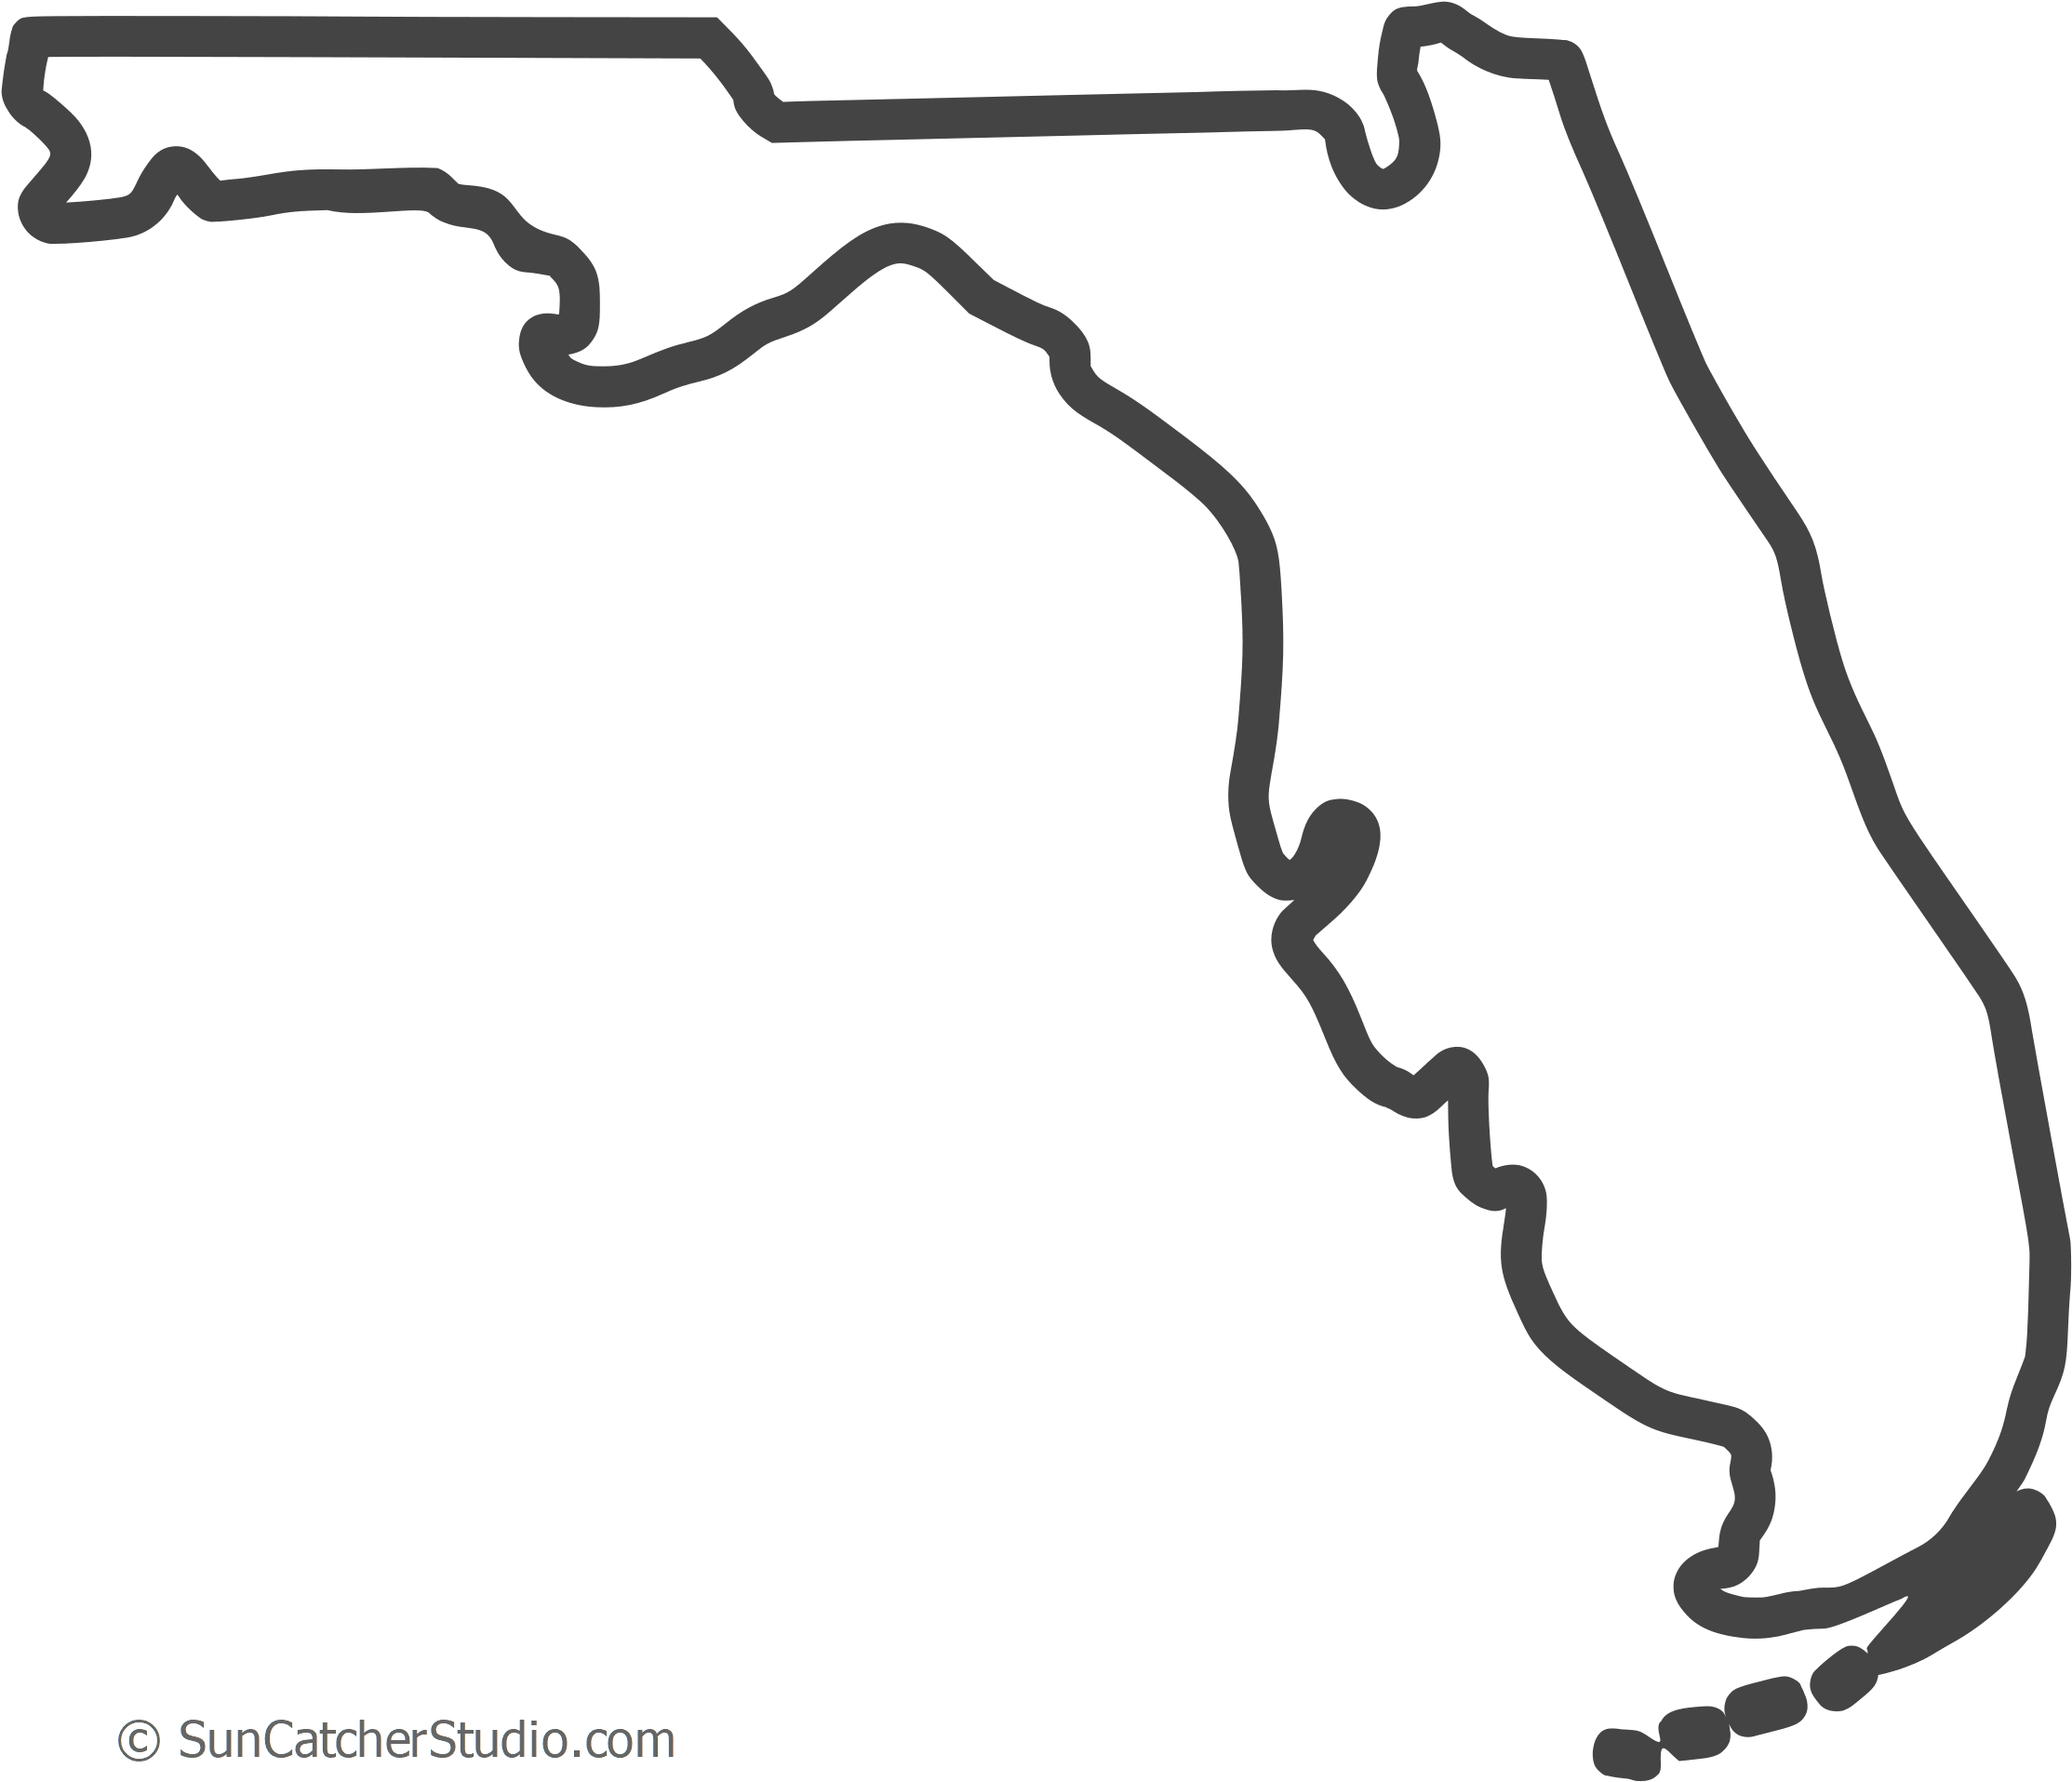 Florida Outline Vector Graphic